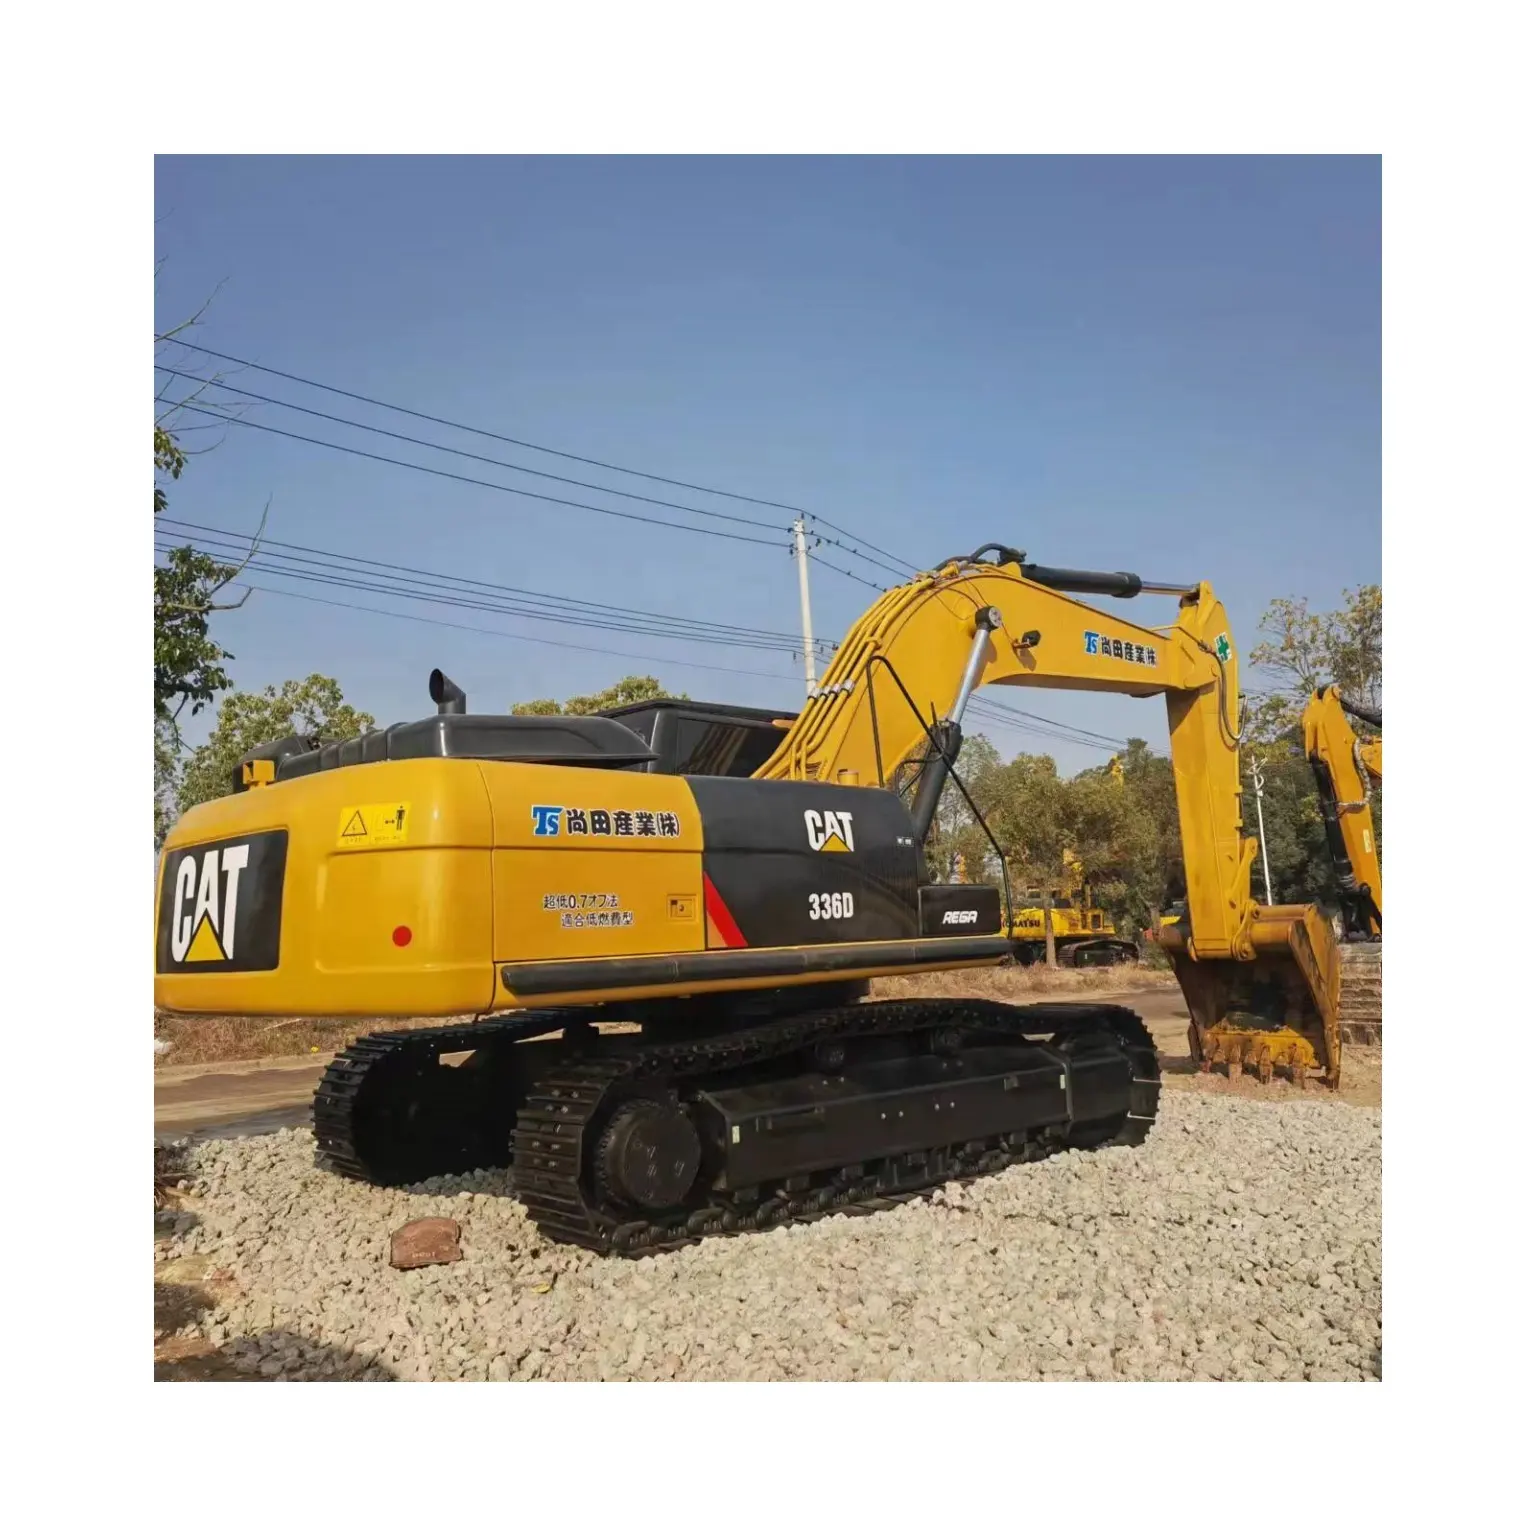 Used USA Brand New Model Caterpillar Cat336D 36ton Excavator with Cheap Price In China For Sale